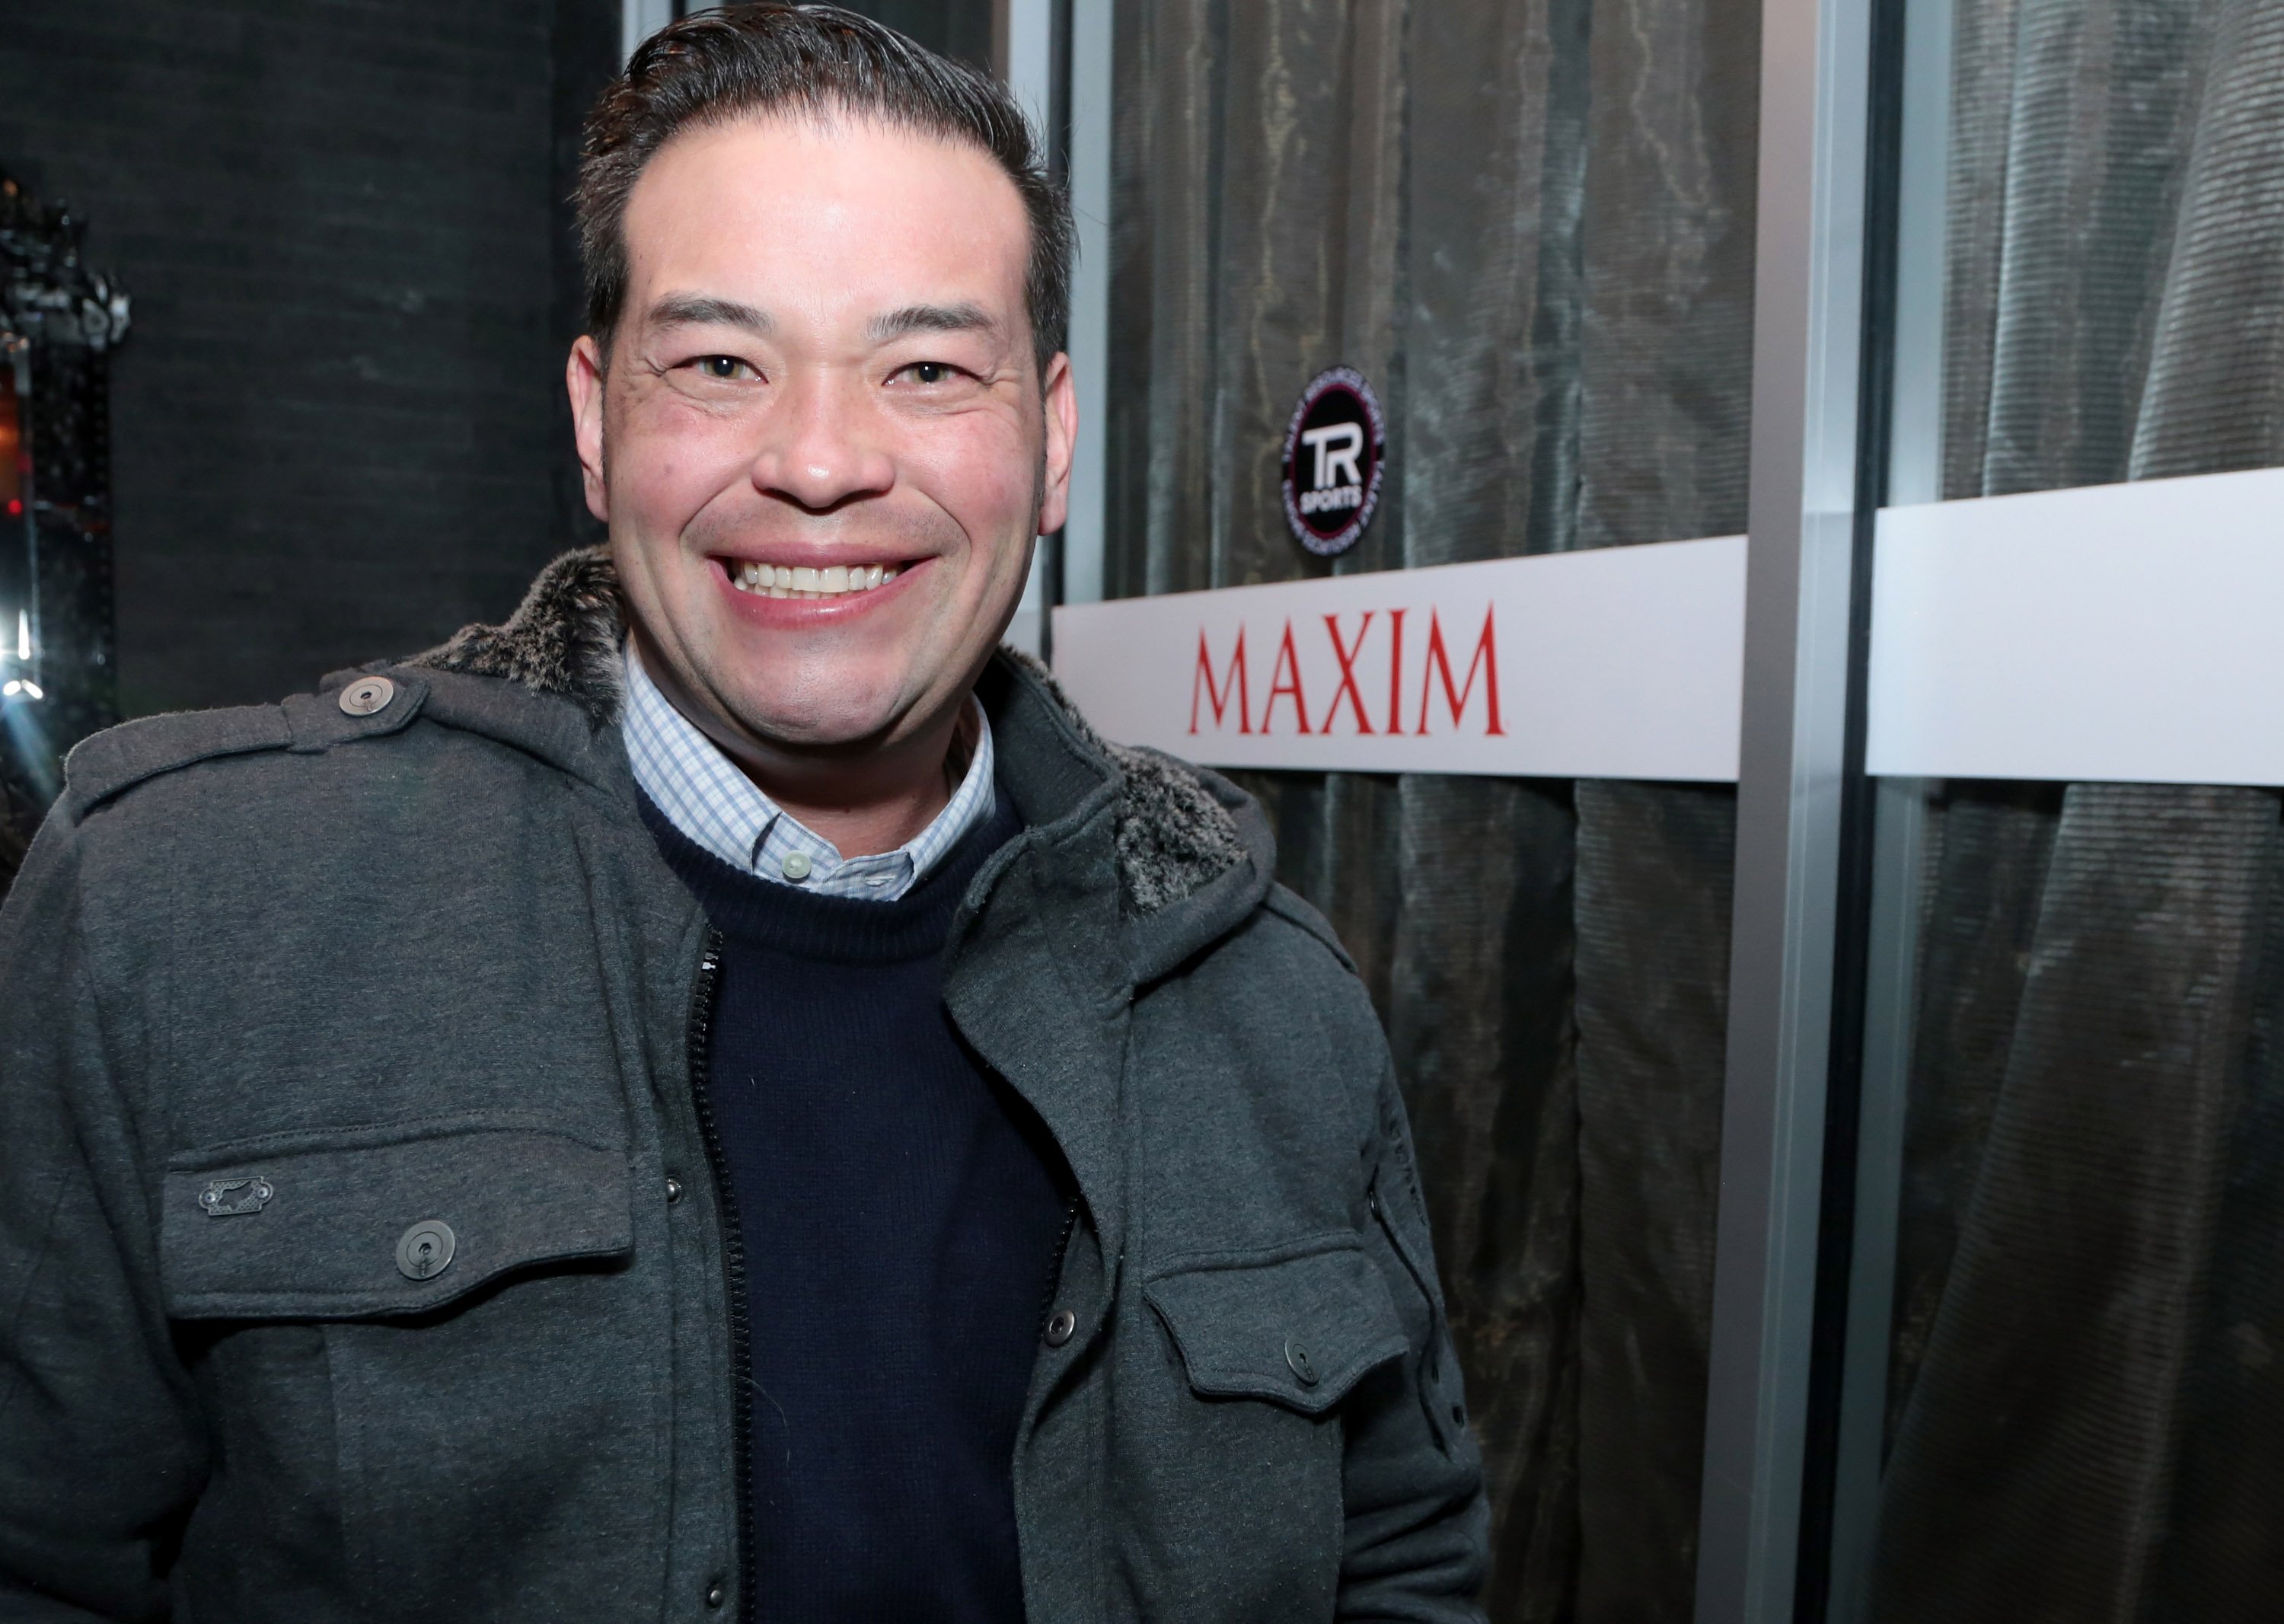 DJ Jon Gosselin during the Maxim's 2014 "Big Game Weekend" in New York City. | Photo: Getty Images